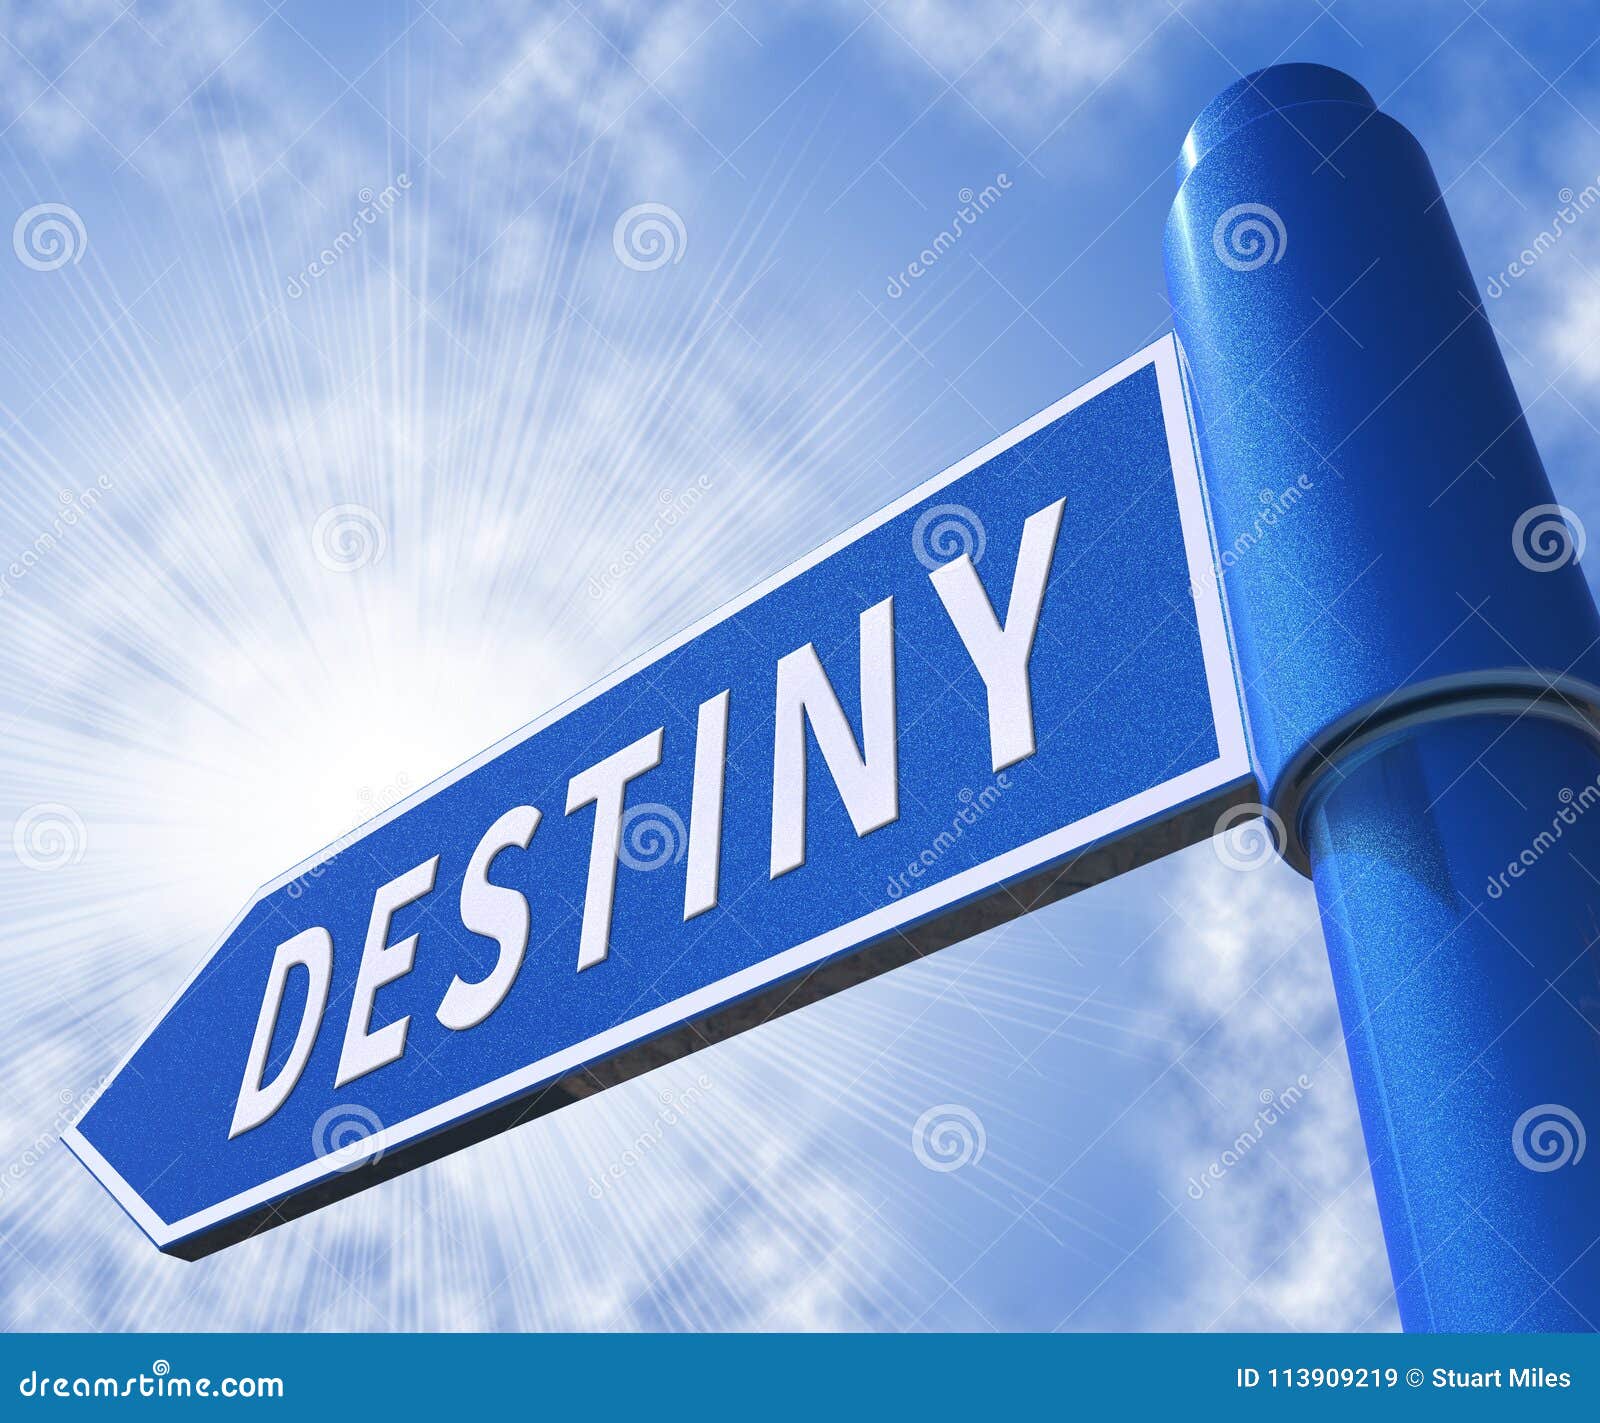 destiny sign meaning progress and prophecy 3d 